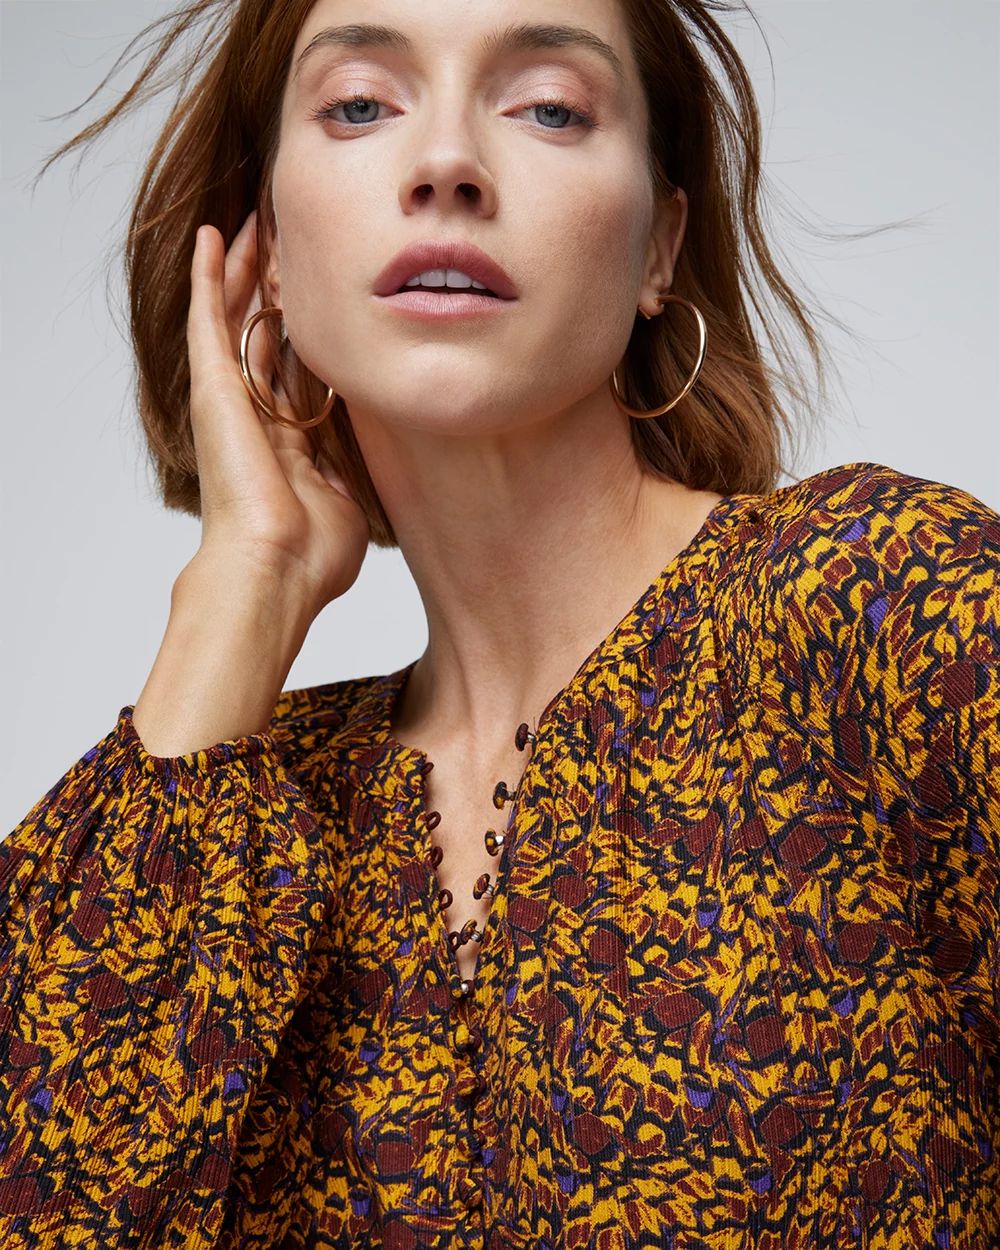 Long Sleeve High-Low Printed Blouse click to view larger image.